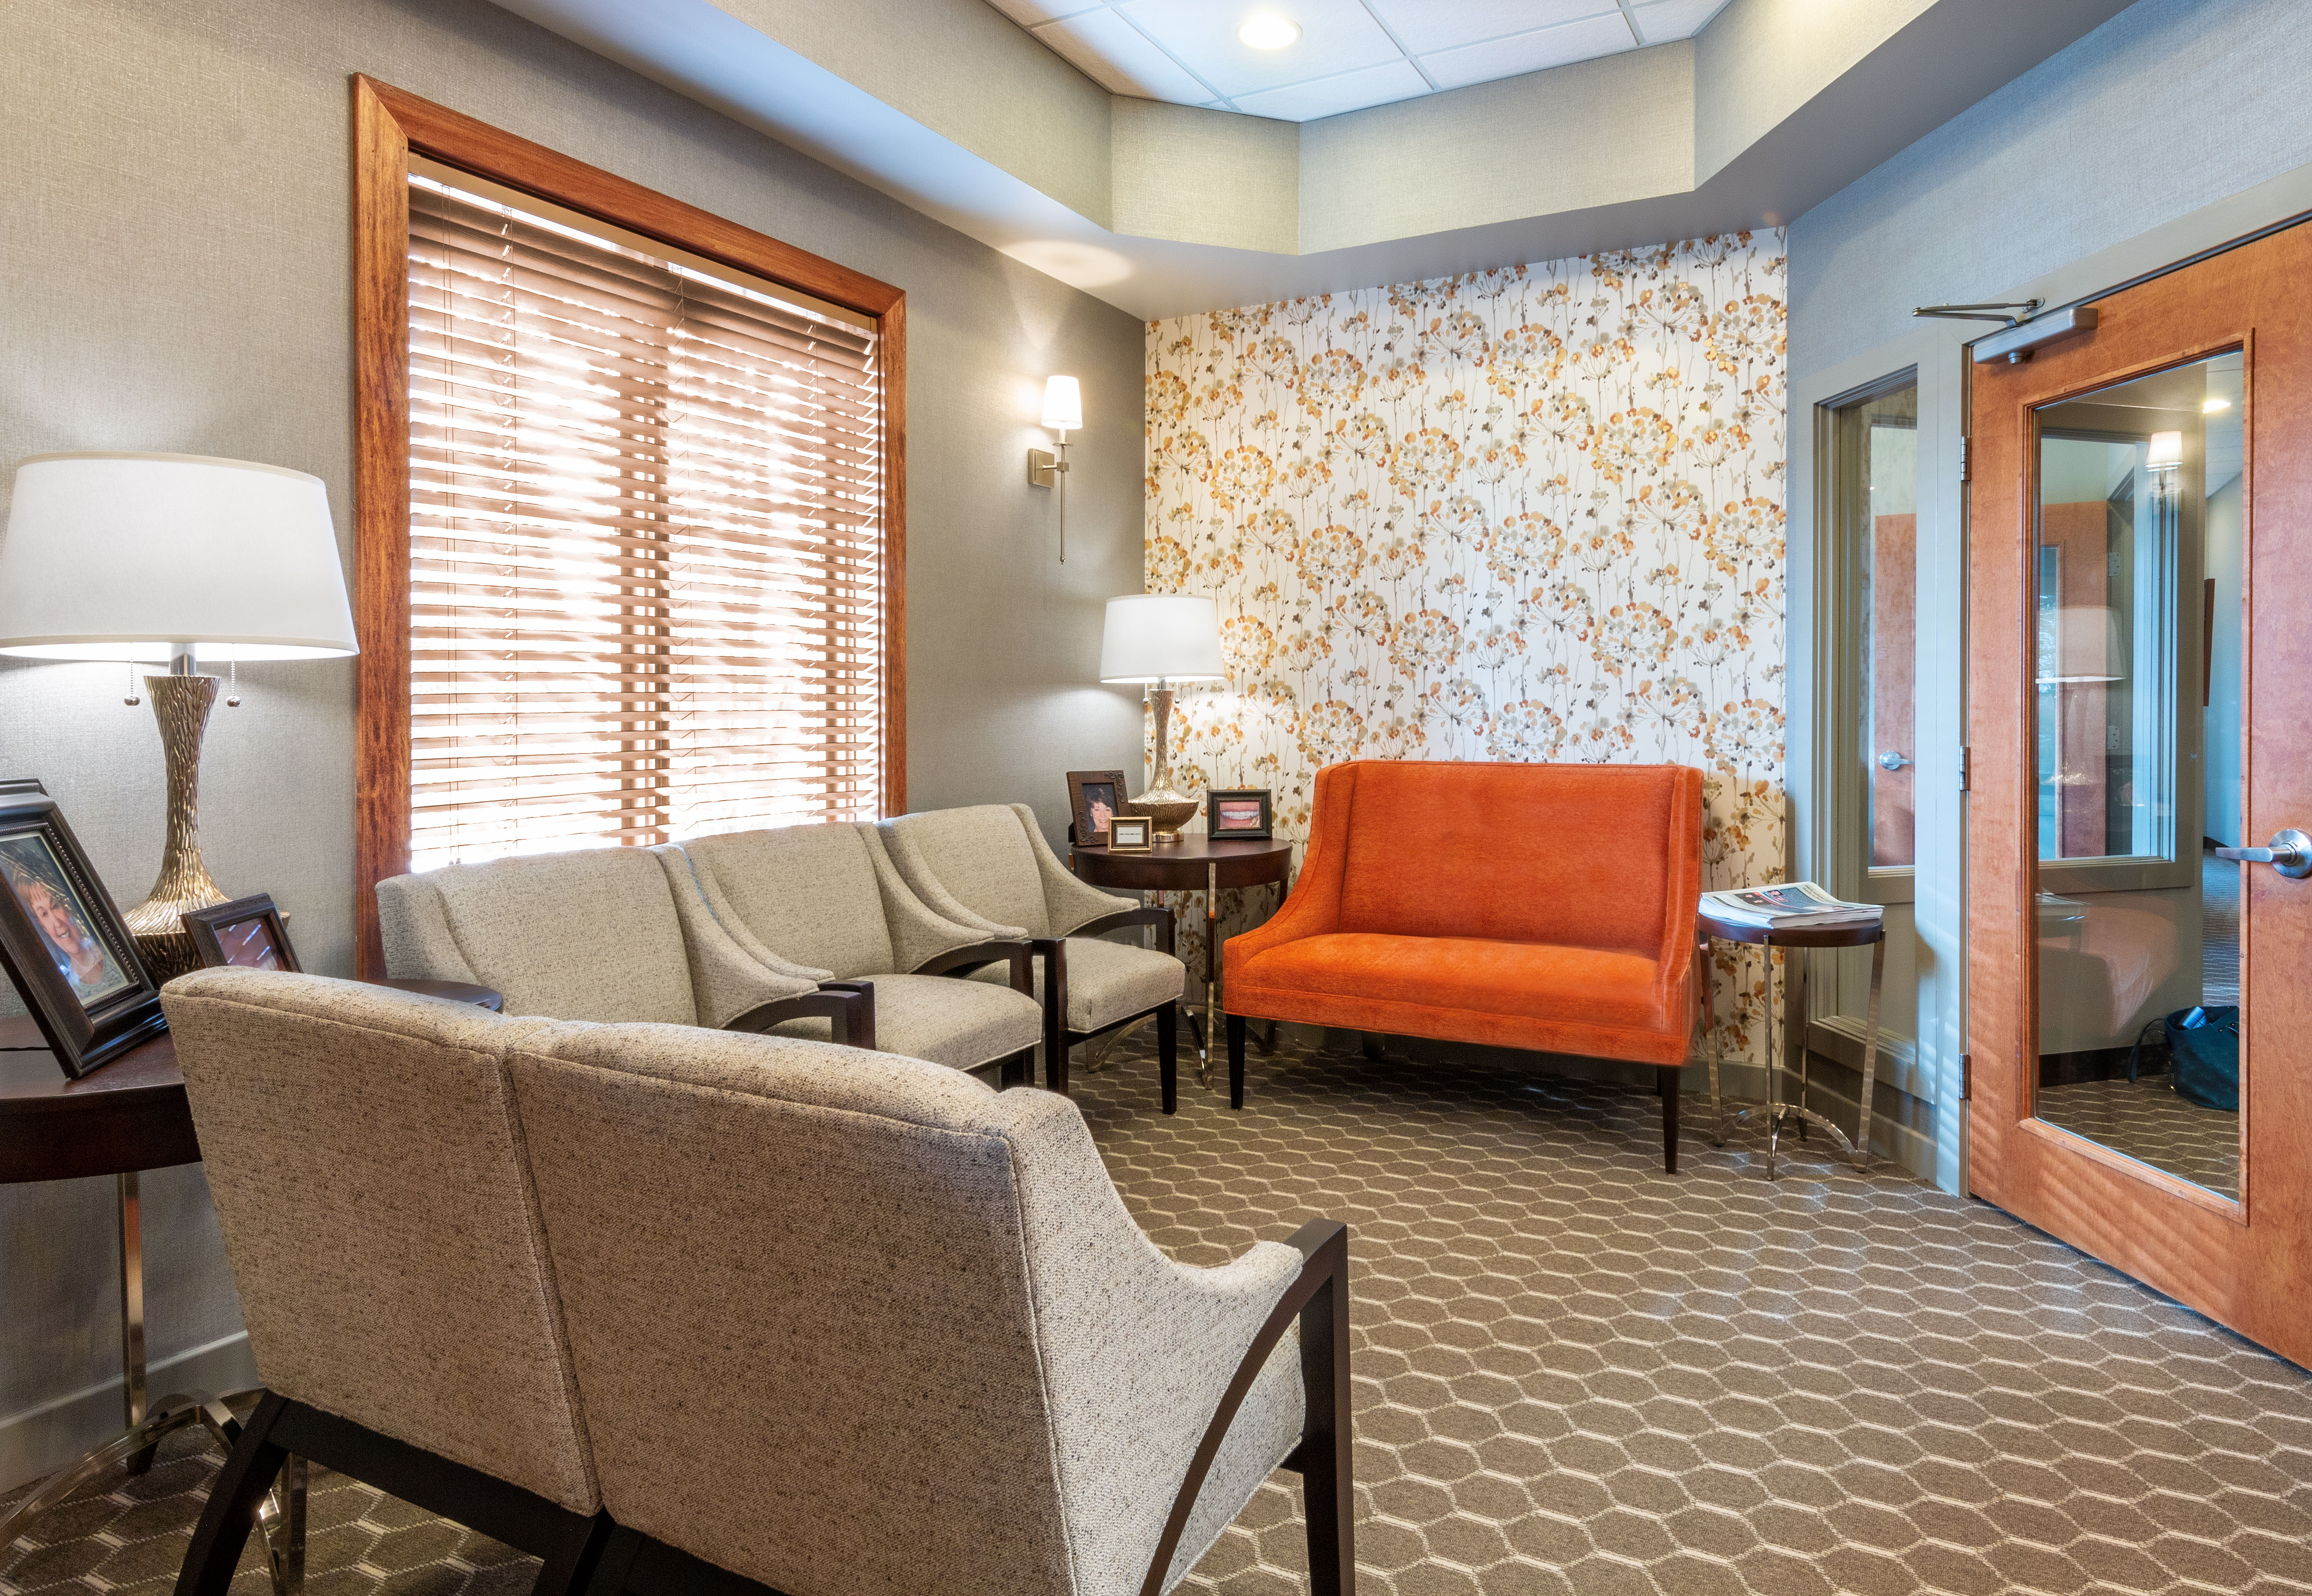 Waiting room with orange sofa in front of floral papered wall and 5 chairs